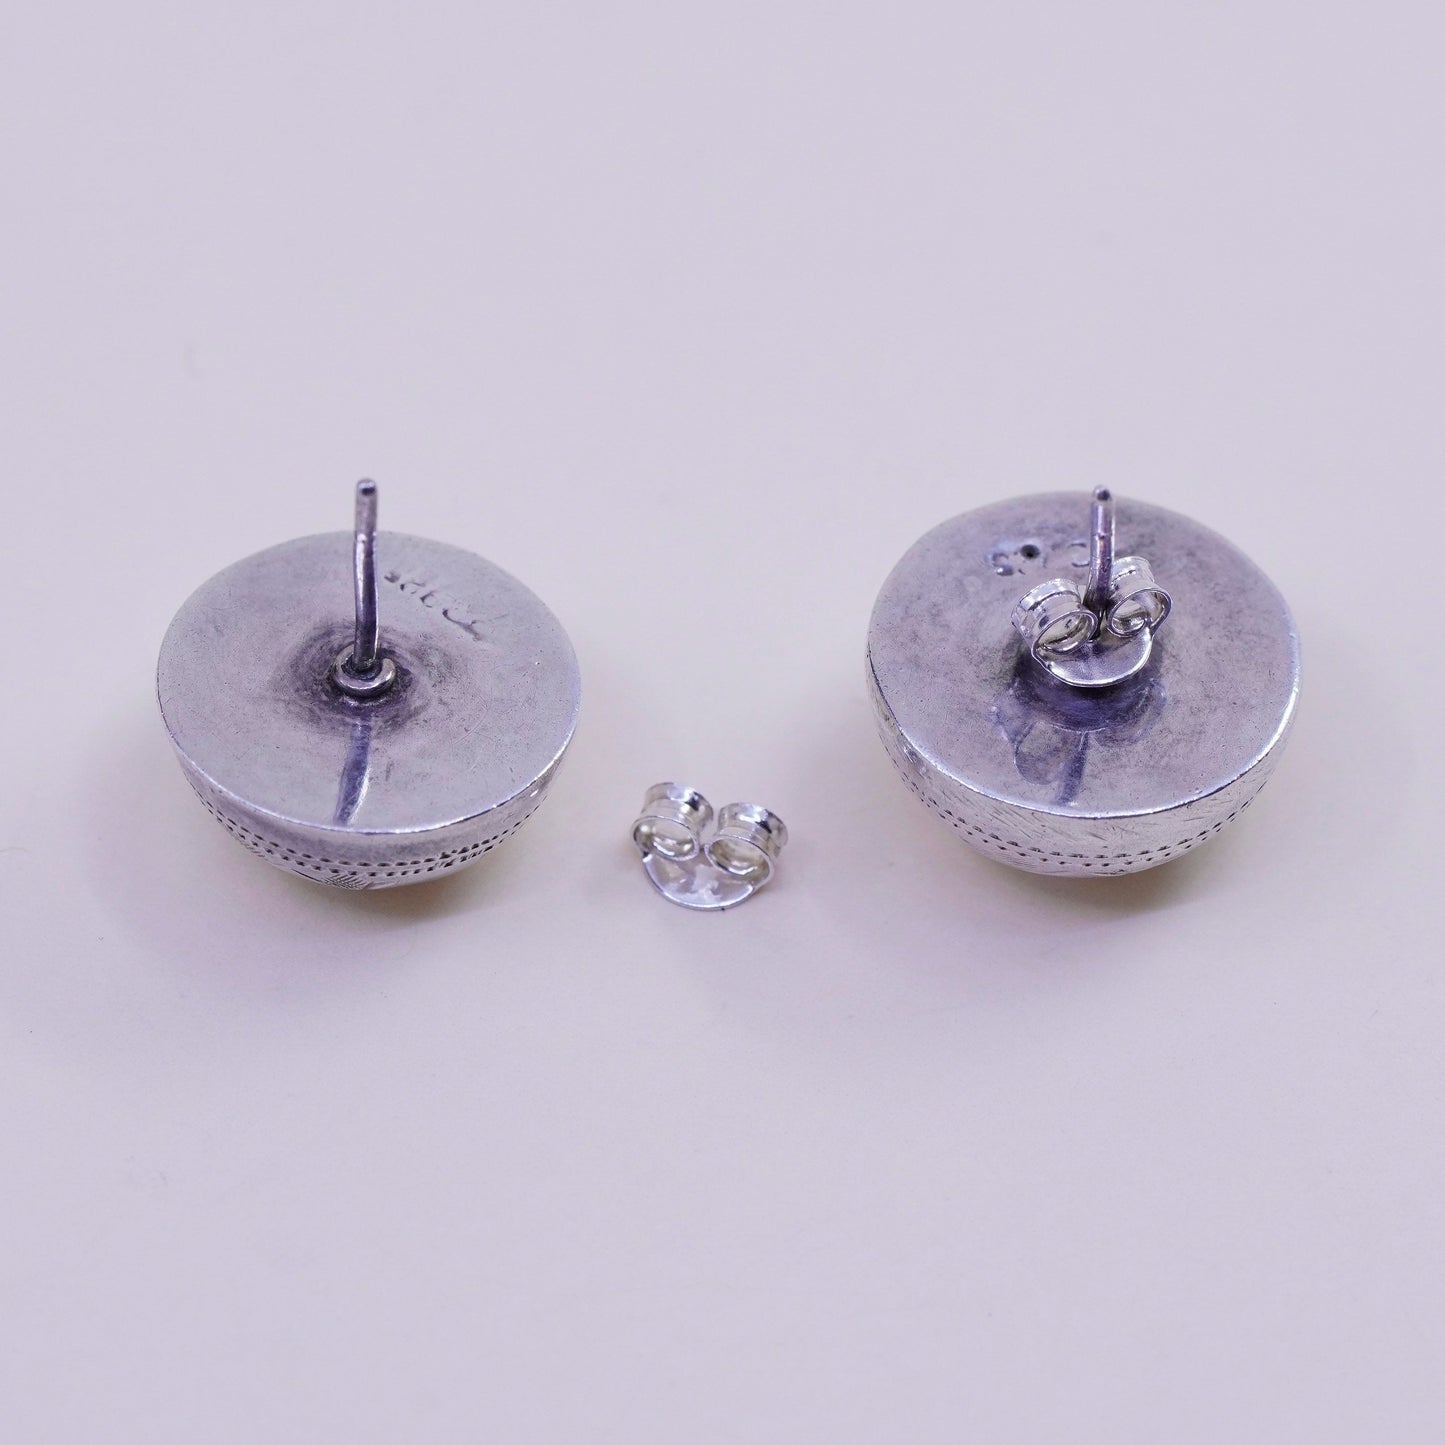 0.75”, Vintage sterling silver button studs, handmade puffy 925 earrings